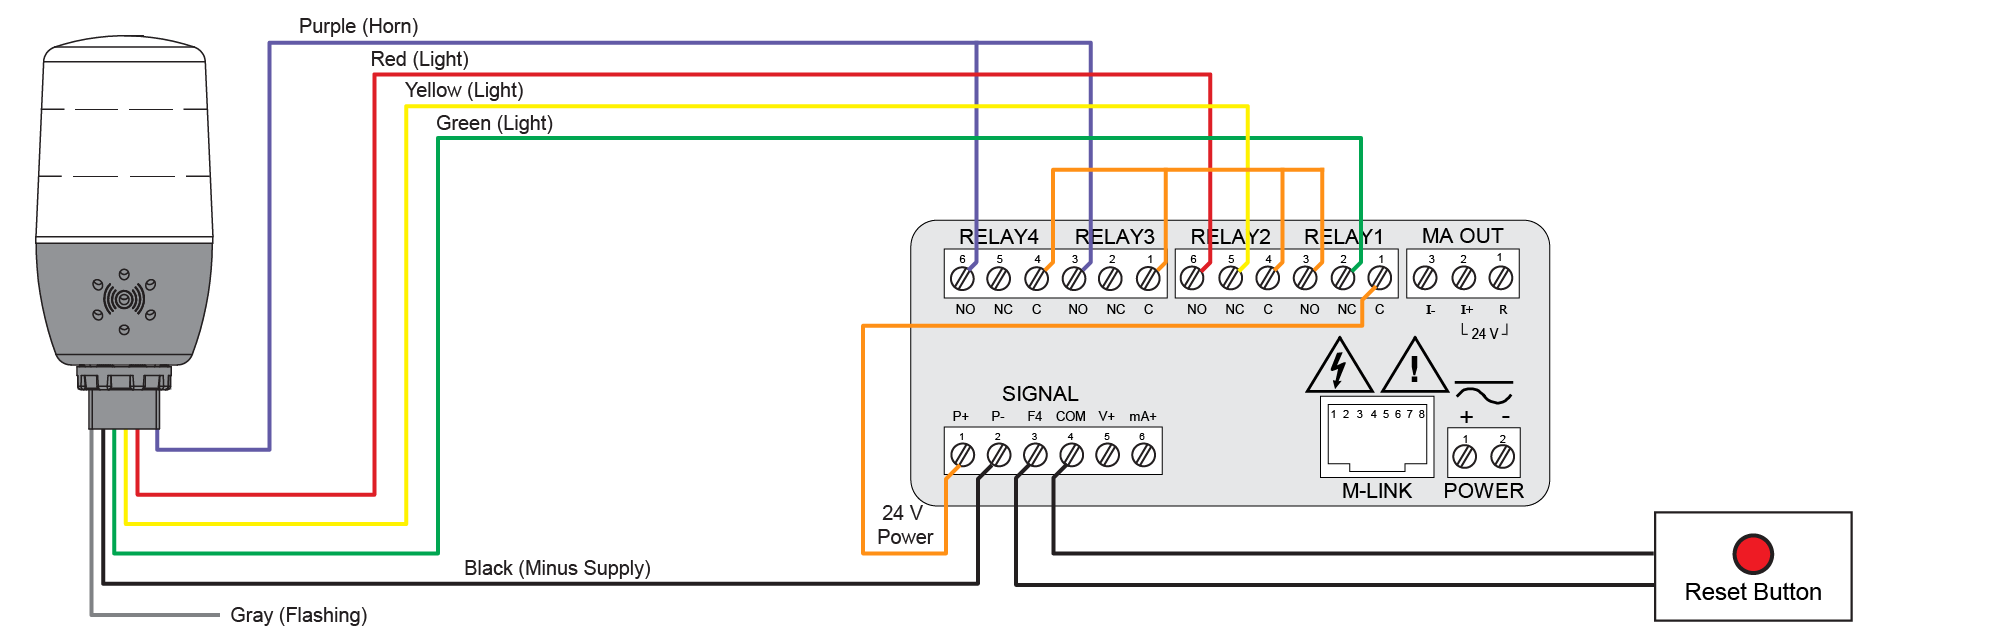 Wiring Connections for MOD-LH3LC-RYG Models Using ProVu Meter Internal Power Supply